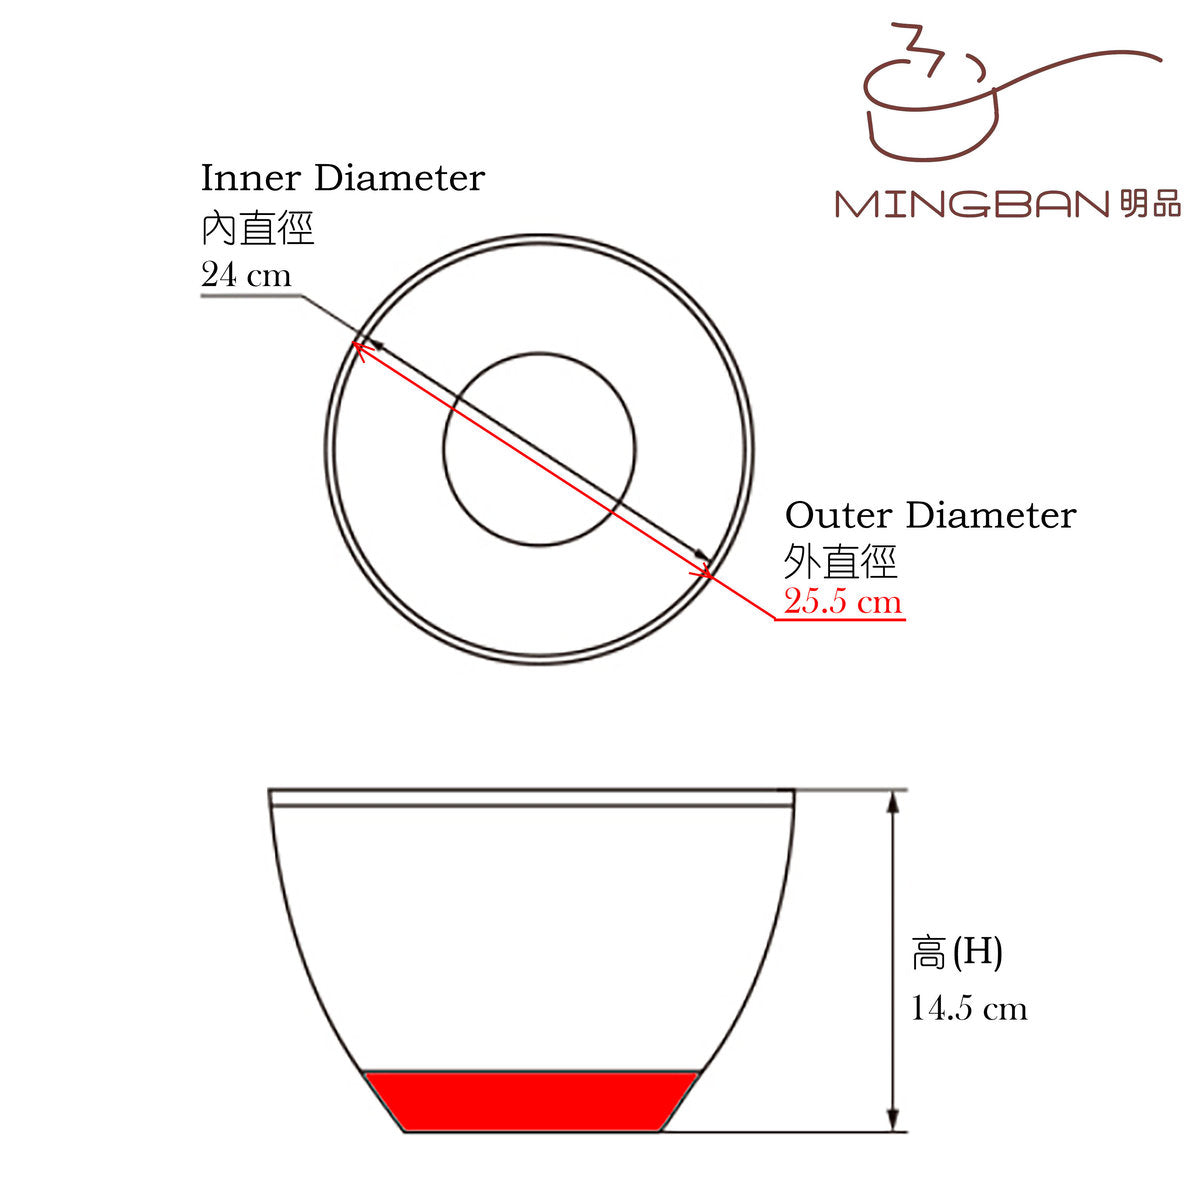 22cm Mixing Bowl with non-slip silicone bottom and inner measurement marks - 1.0L, 1.5L, 2.0L, 2.5L, 3.0L